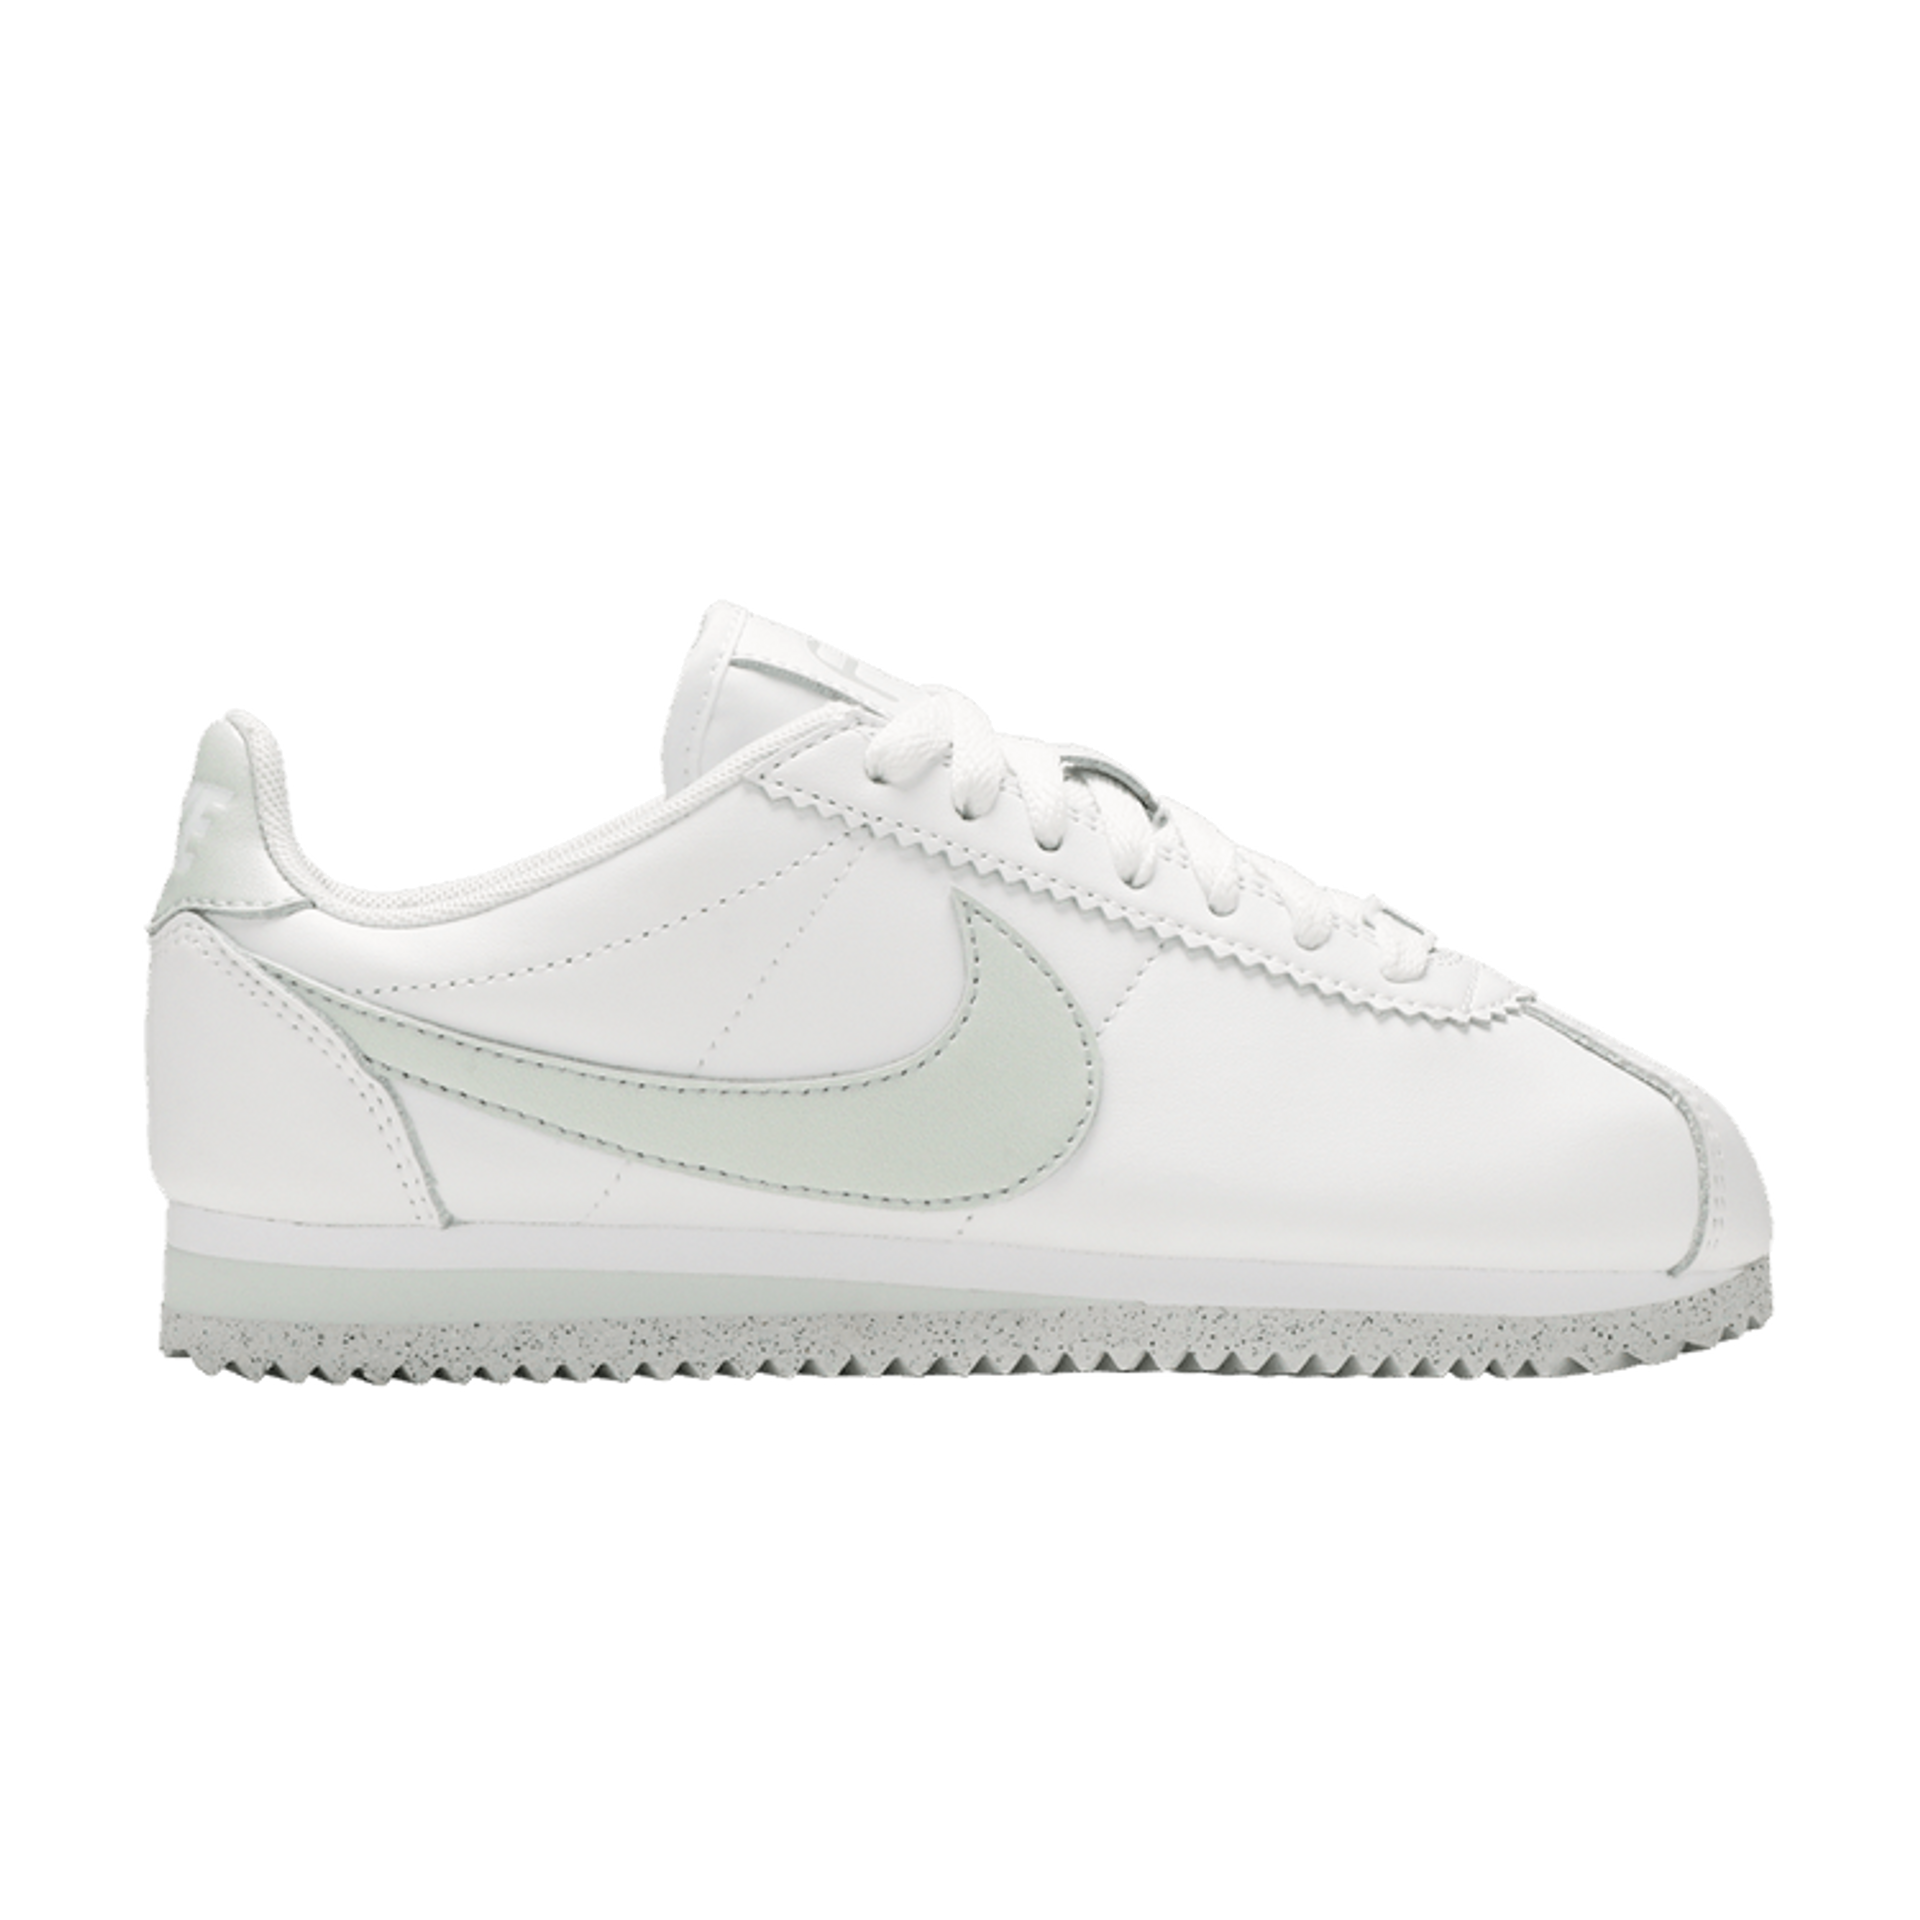 Wmns Classic Cortez Flyleather 'White Light Silver'